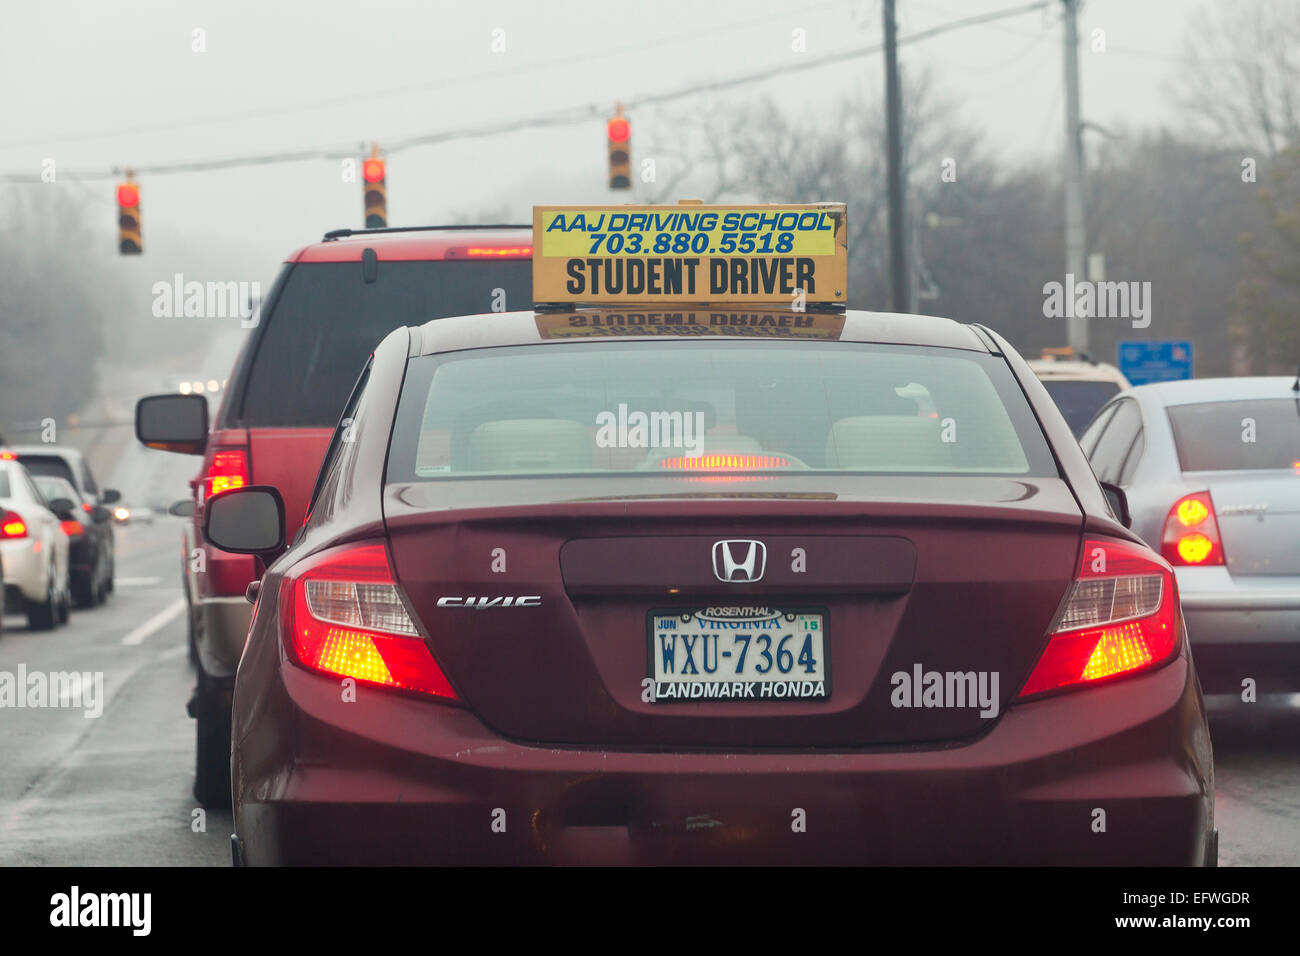 Student driver (learner driver) sign on top of driver training car - USA Stock Photo